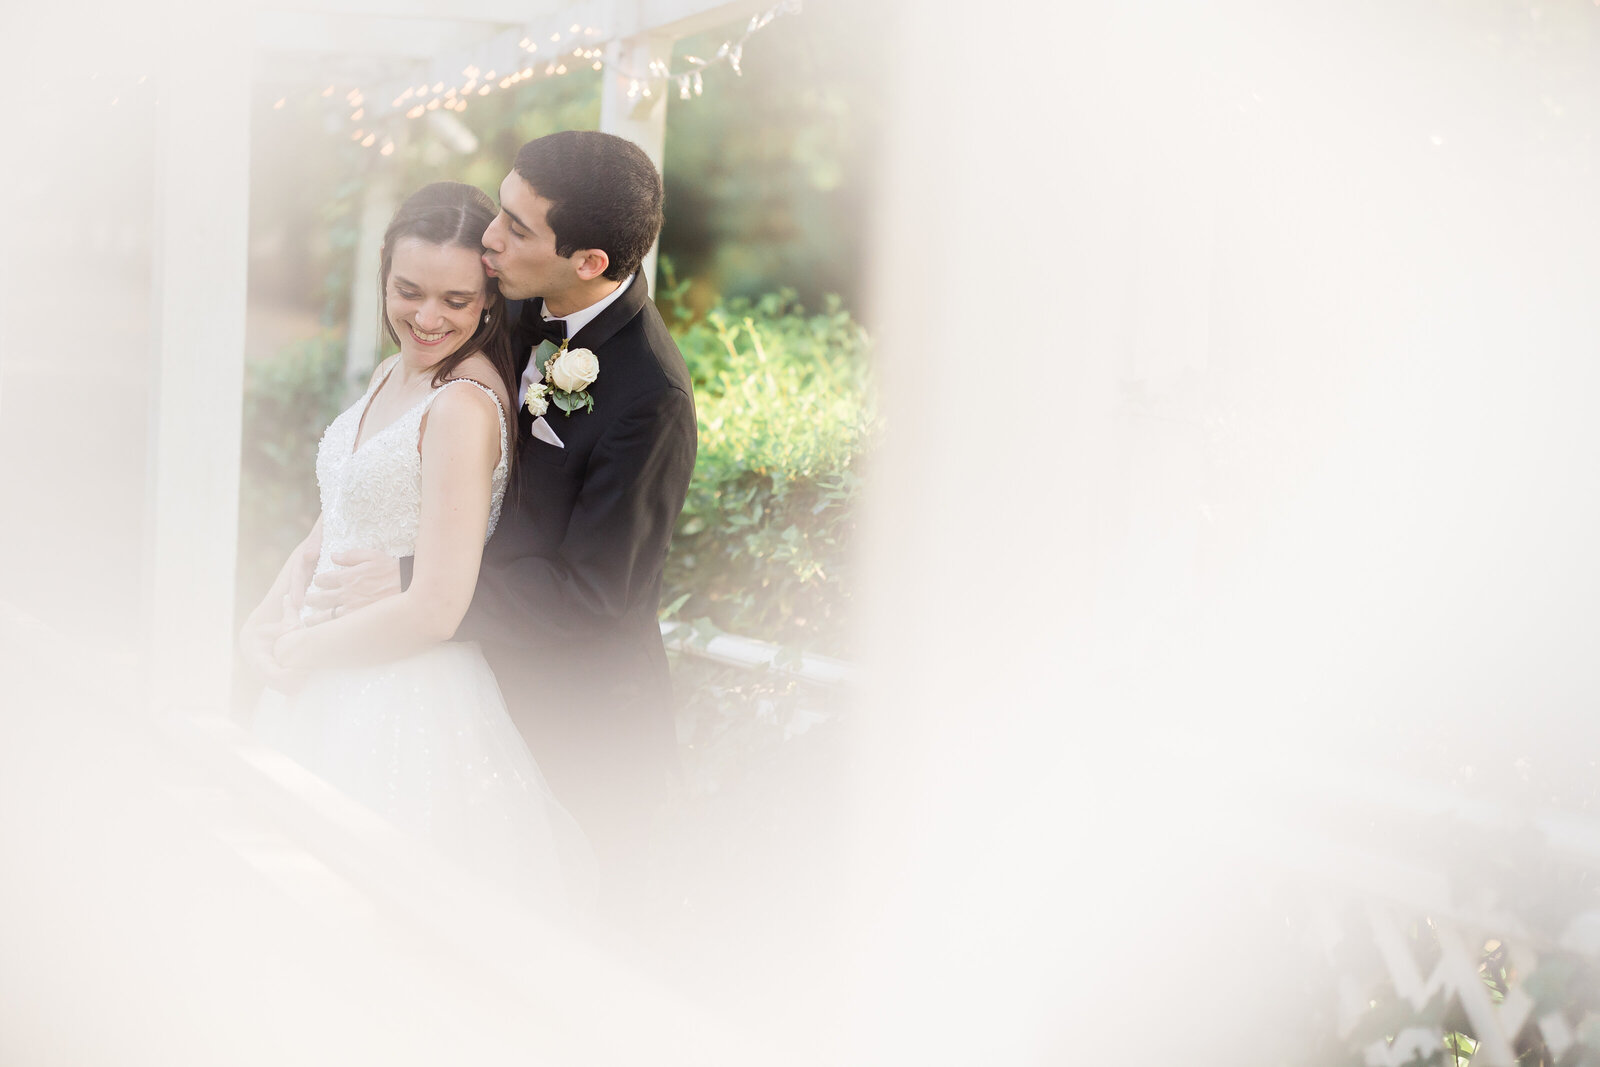 A bride and groom embracing during their wedding photography session at THE CEDARS Weddings & Events. Photo captured by Gary Lun Photography, in front of a window.